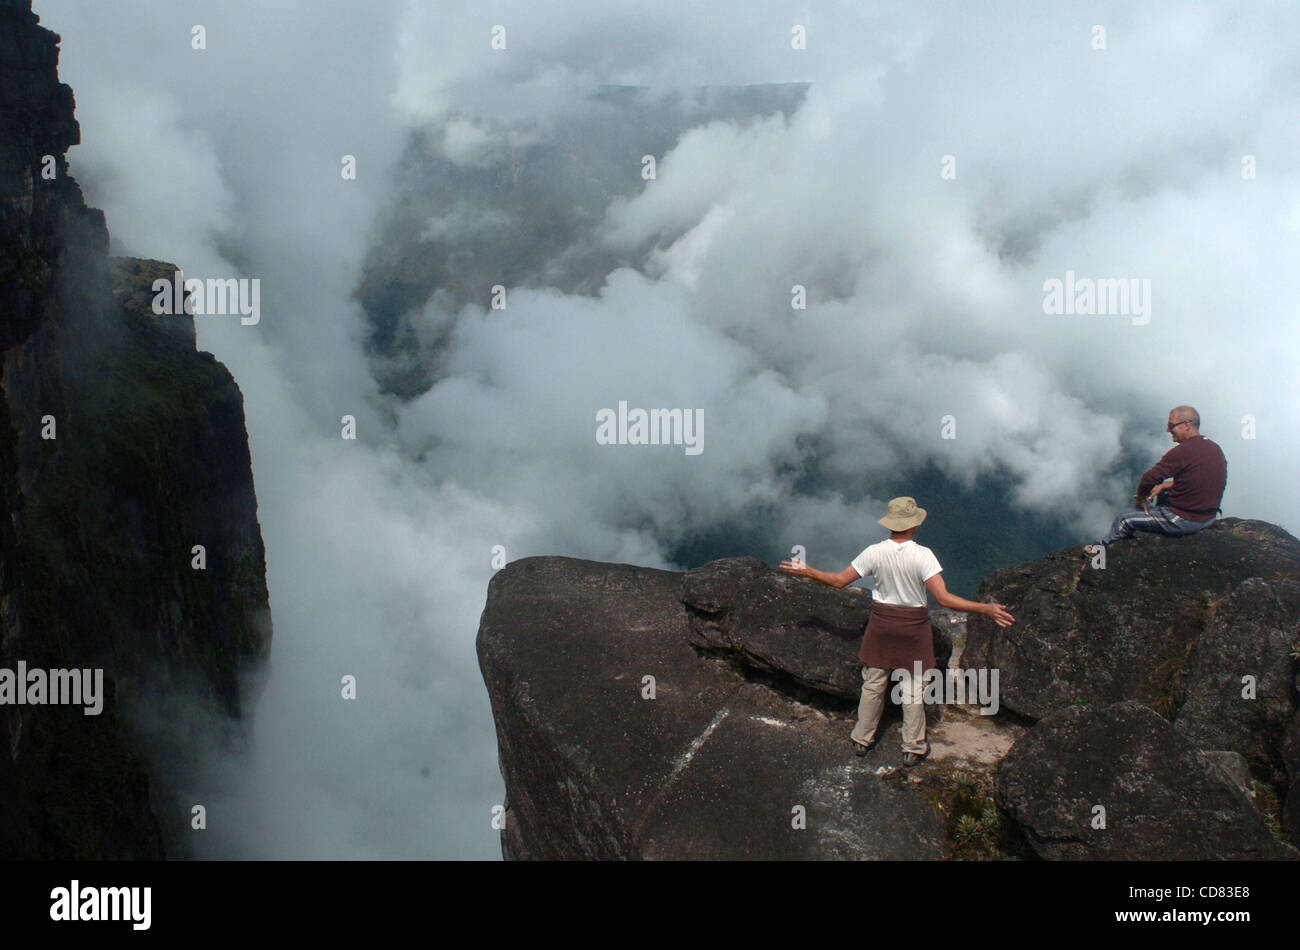 Apr 21, 2008 - Canaima, Venezuela - At and above cloud level, American Ben Ballweg, left, and Italian Roberto Aquila talk about the immense size of nearby Mount Canaima while sitting on rocks with a drop of hundreds of meters atop Mount Roraima, a 2,810-meter high mountain located in southern Venezu Stock Photo